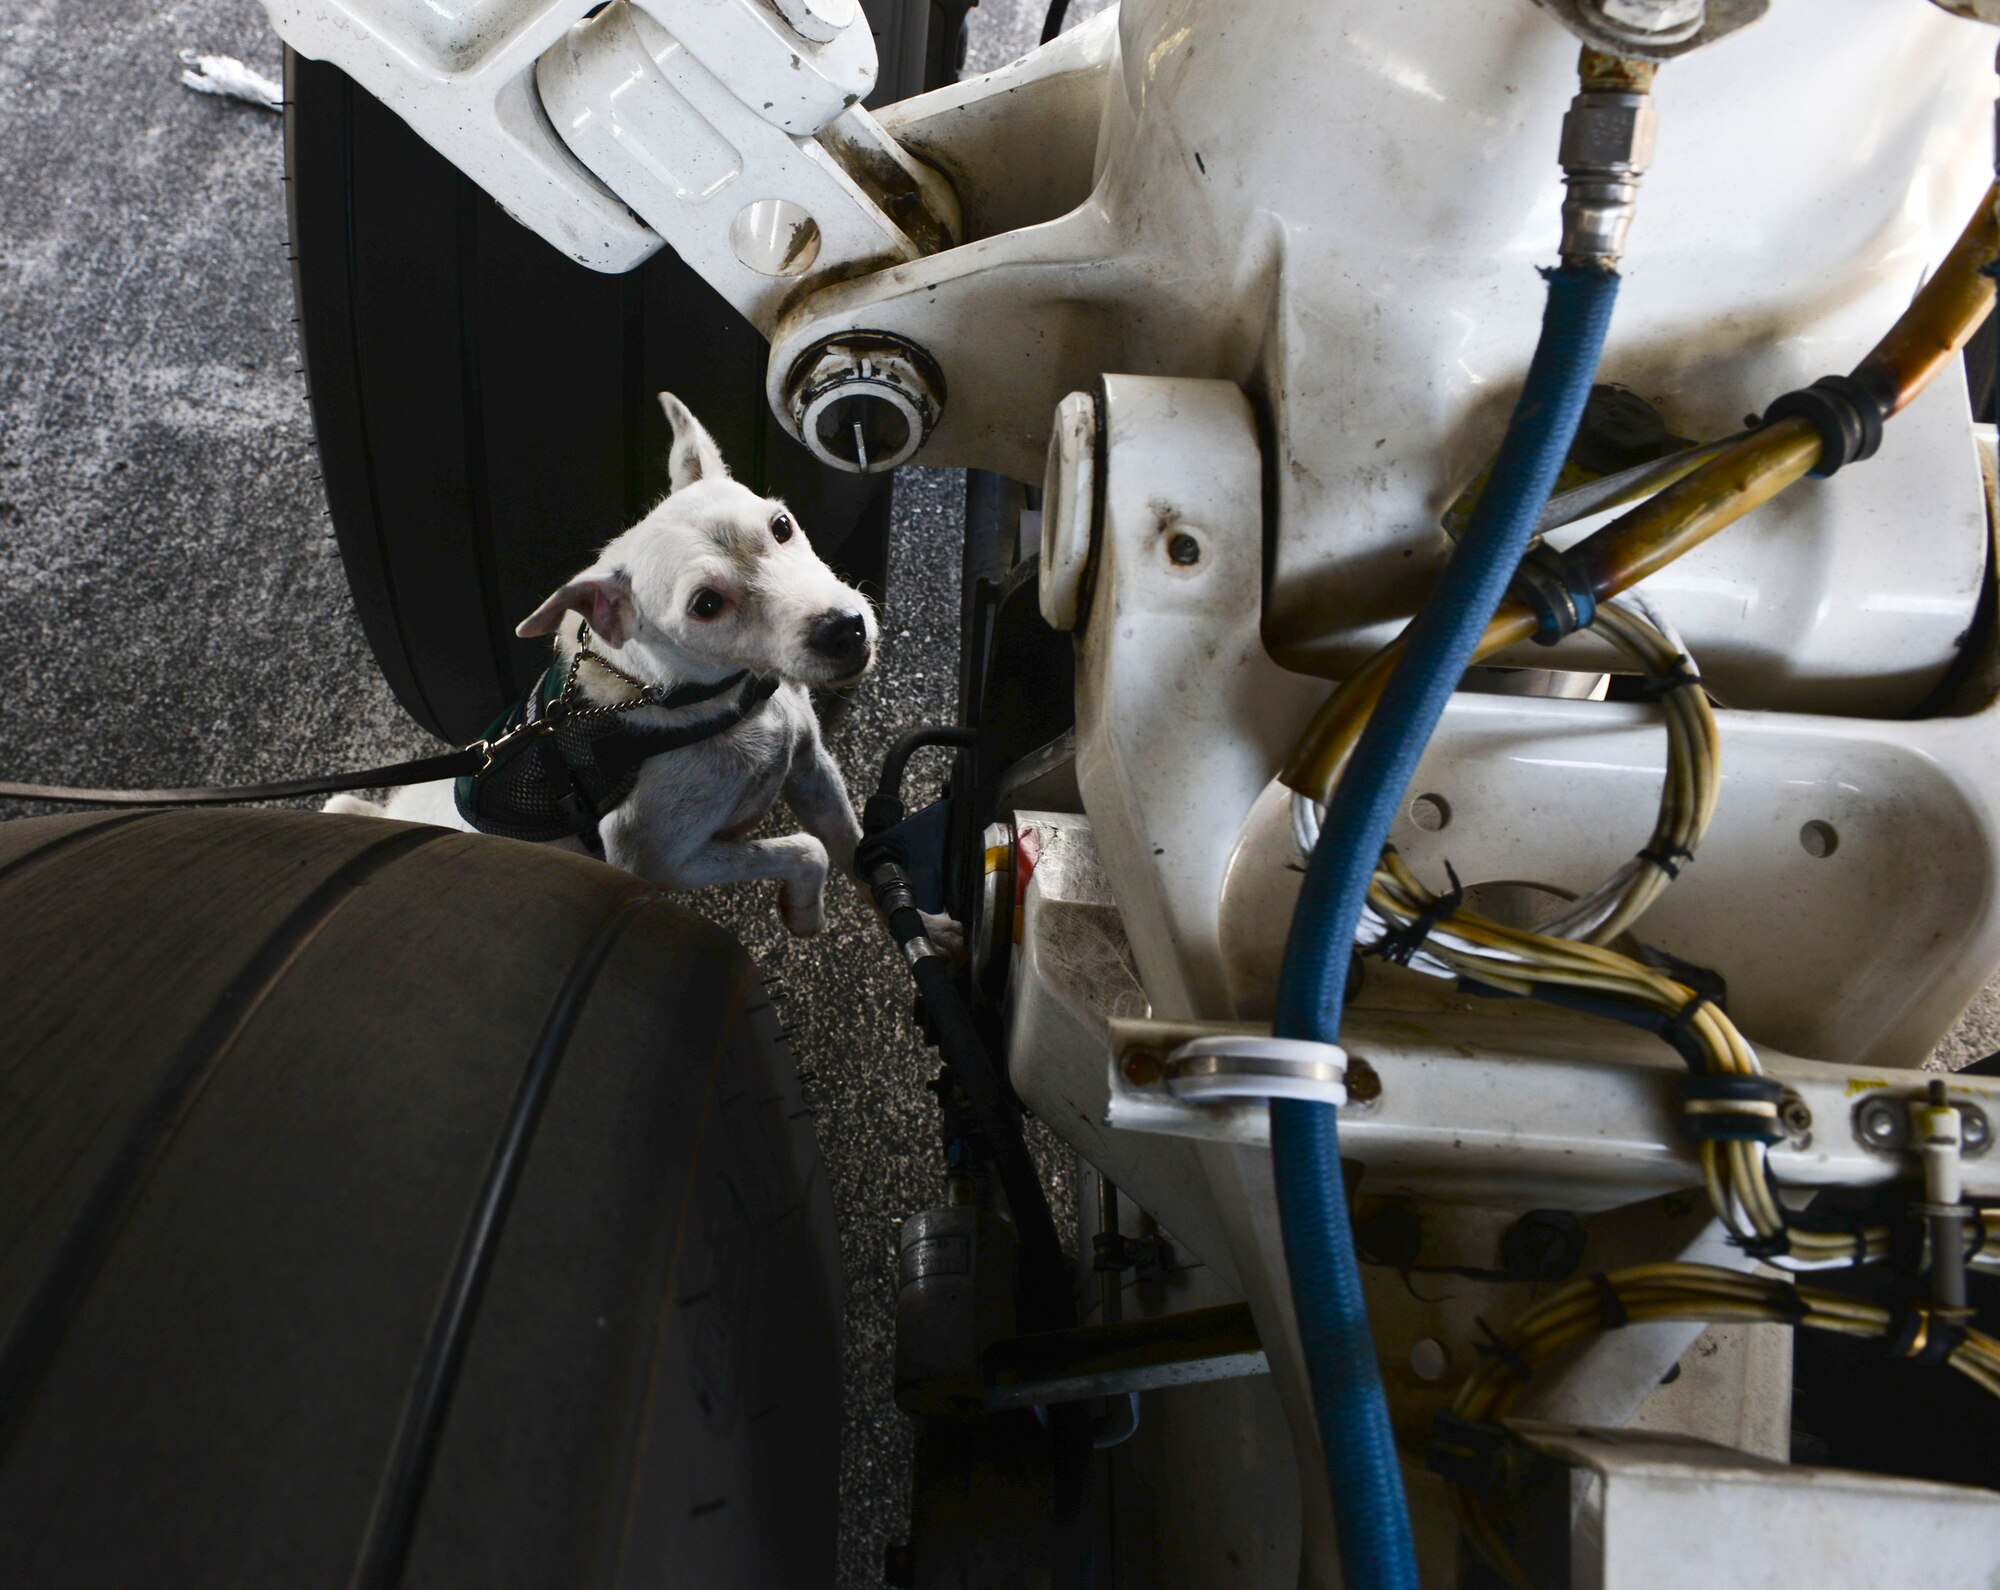 Striker, a U.S. Department of Agriculture brown tree snake detector dog, inspects an aircraft prior to departure April 30, 2015, at Andersen Air Force Base, Guam. All Department of Defense aircraft, household goods, vehicles and cargo are required to be searched prior to departure in order to prevent the establishment of the snakes in other regions. (U.S. Air Force photo by Senior Airman Katrina M. Brisbin/Released)